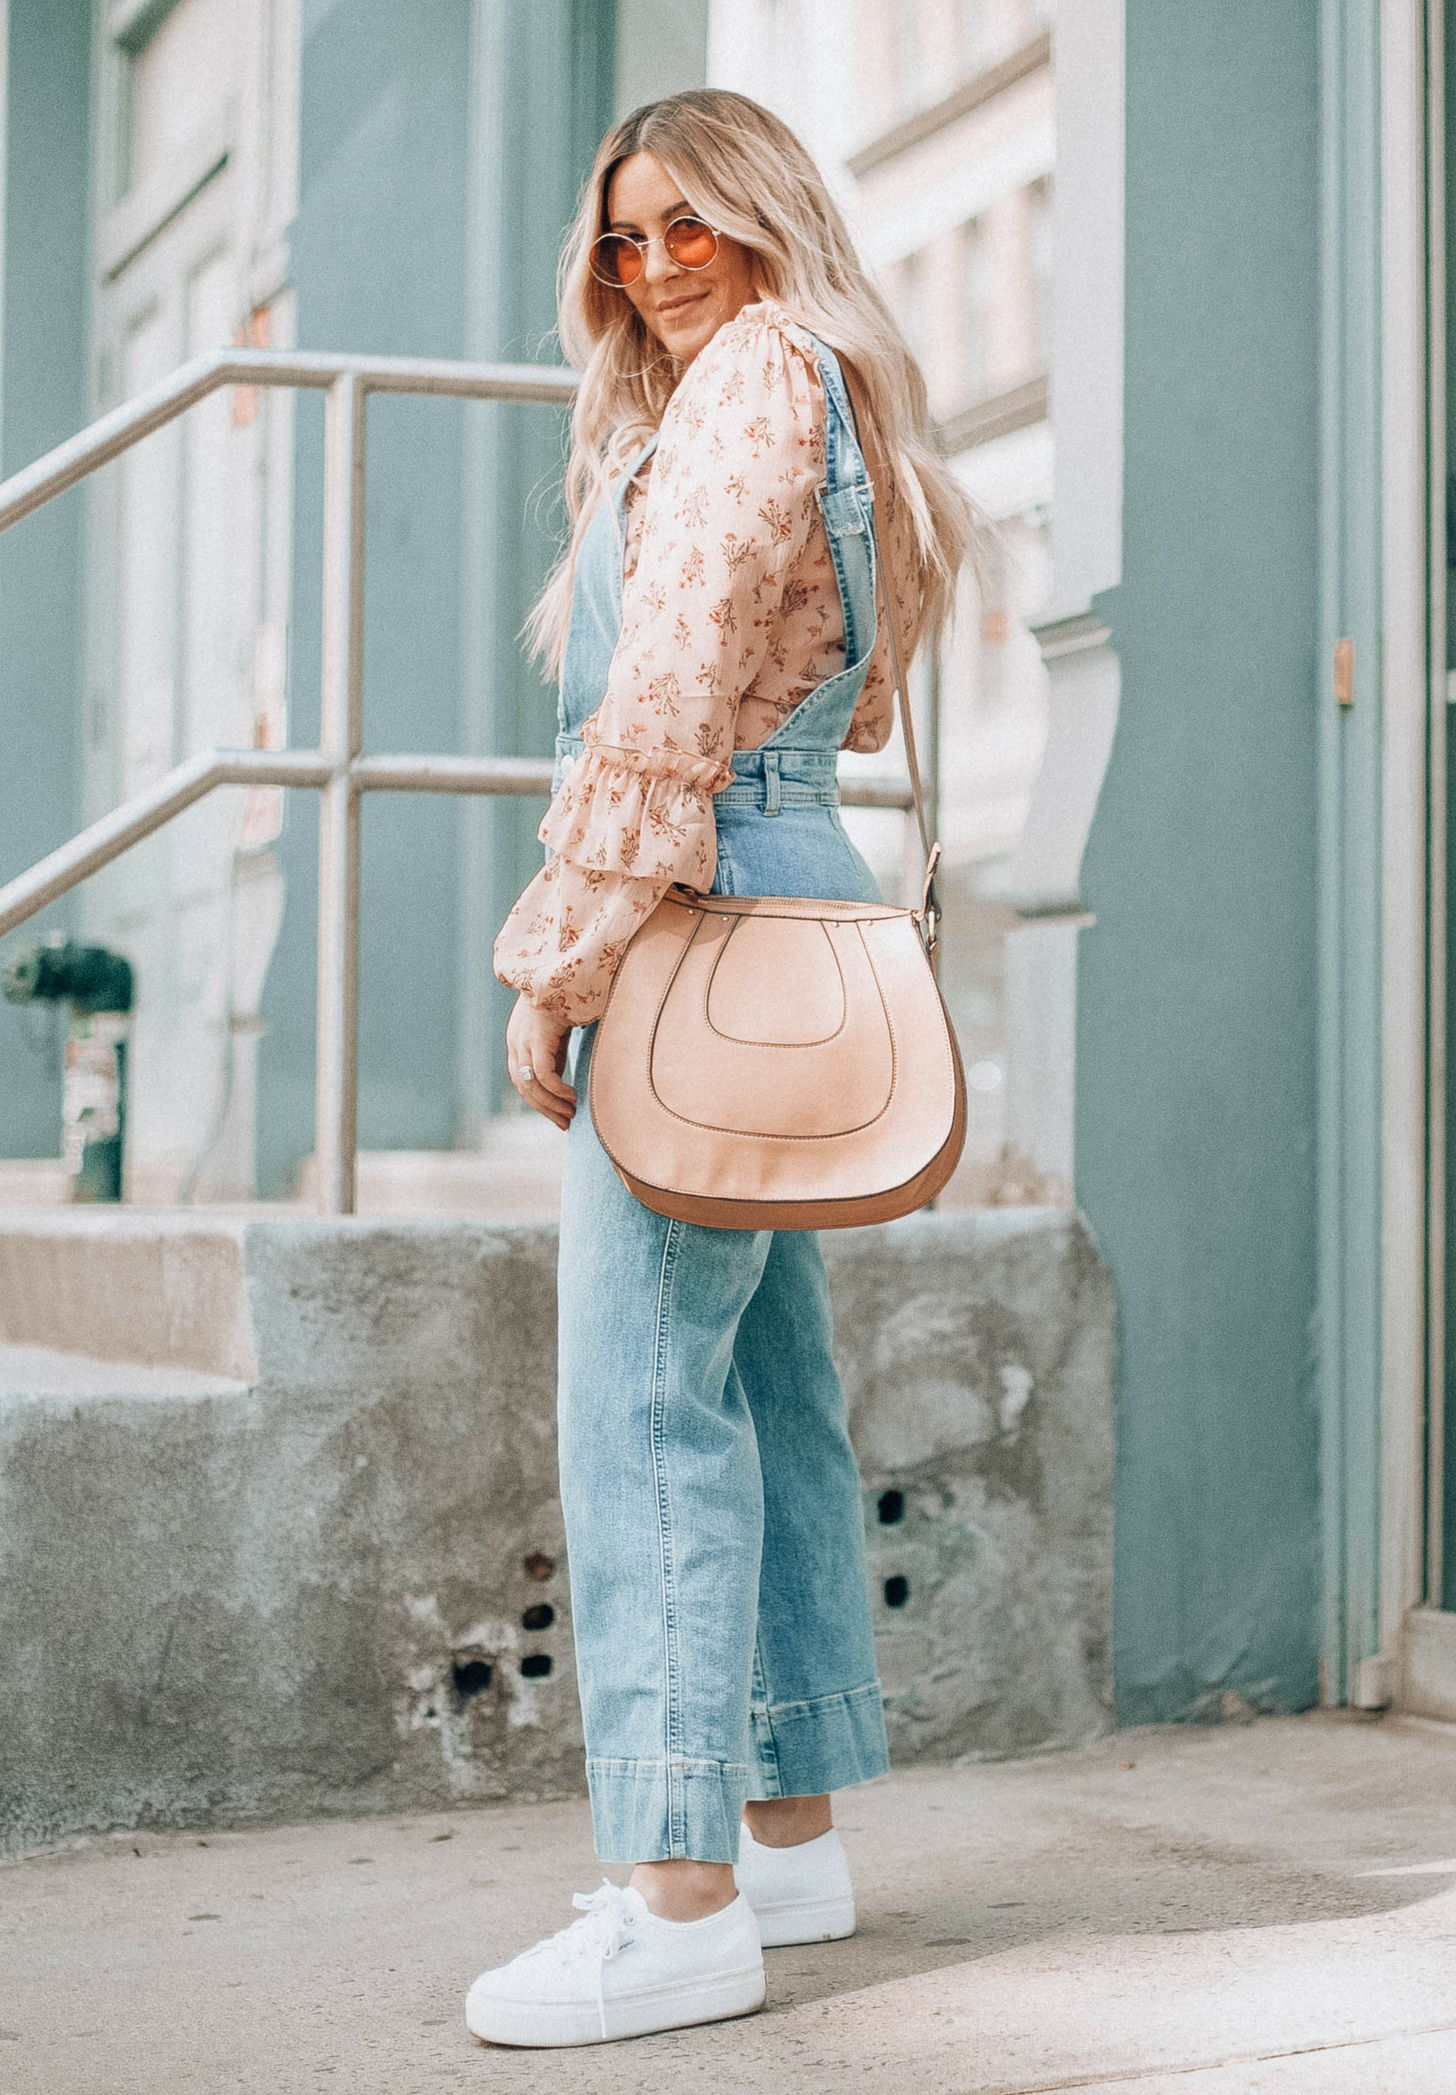 styling overalls this fall